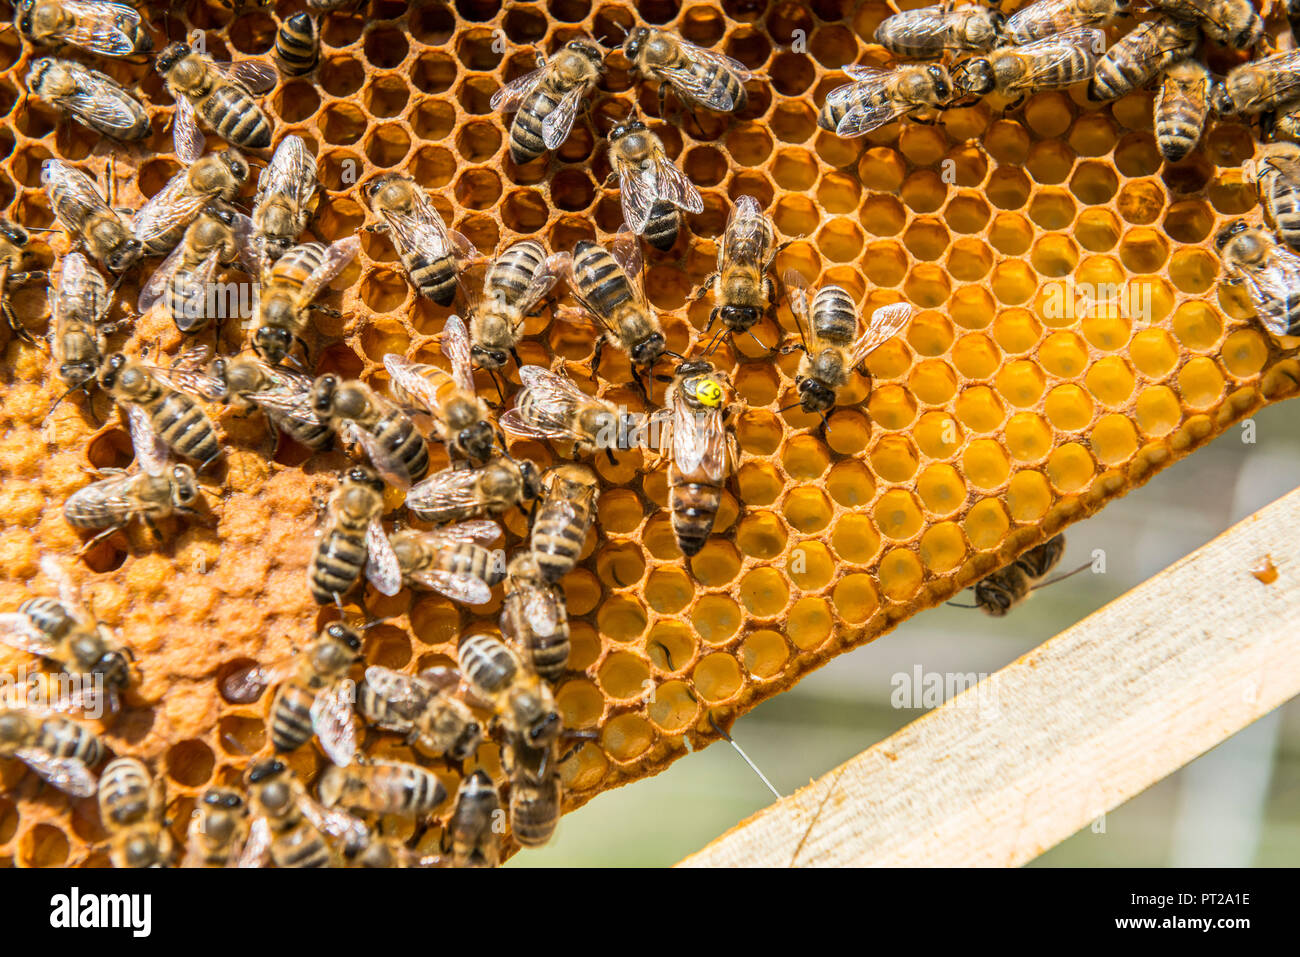 A bees producing honey, a typical product from Non valley, Trentino Italy Europe Stock Photo